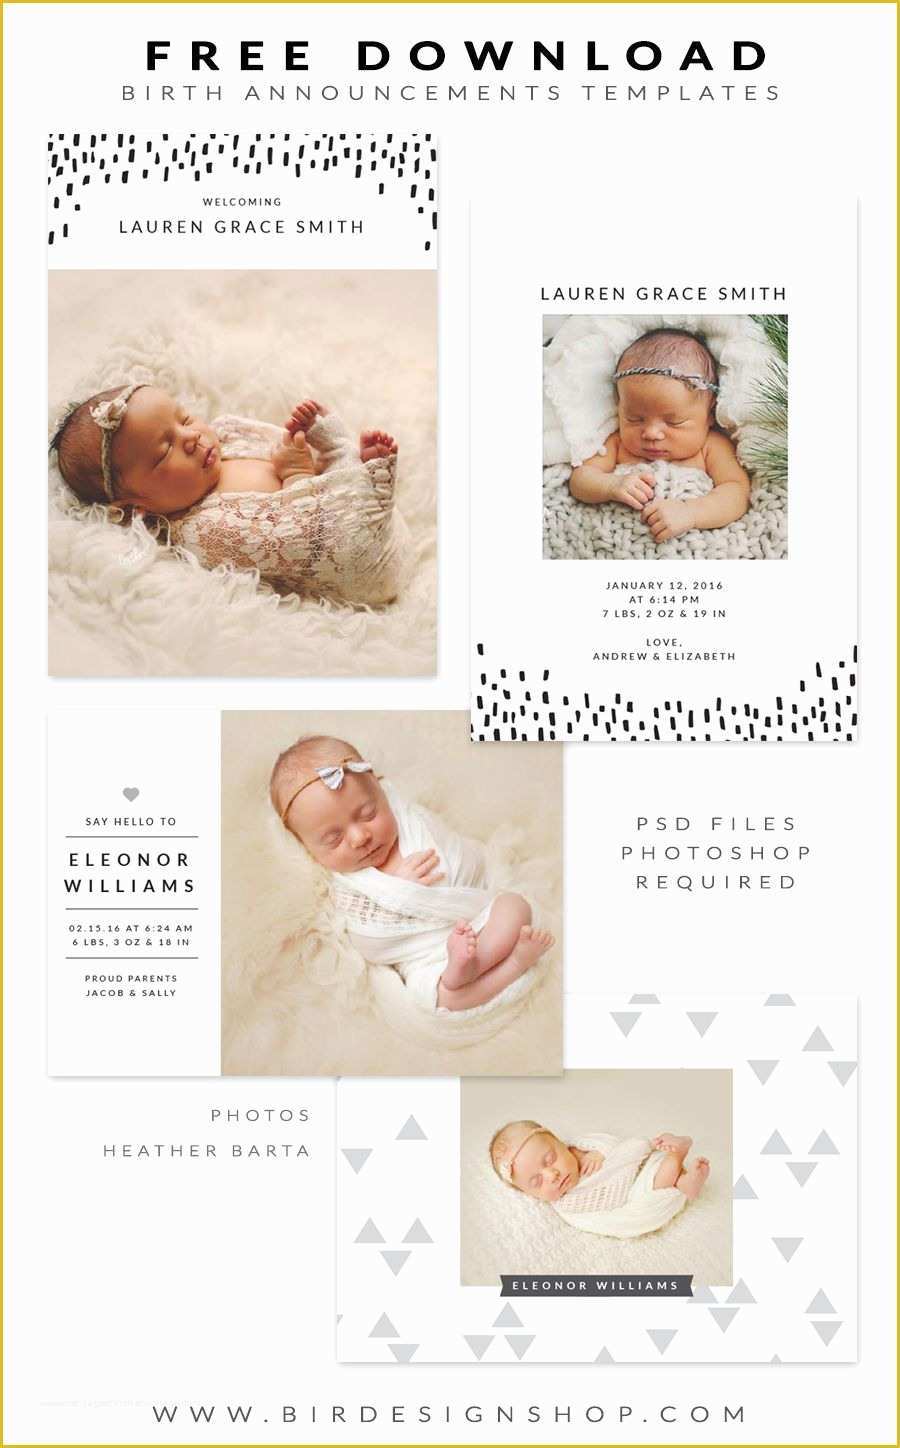 Free Birth Announcement Template Of Free Birth Announcements Templates January Freebie